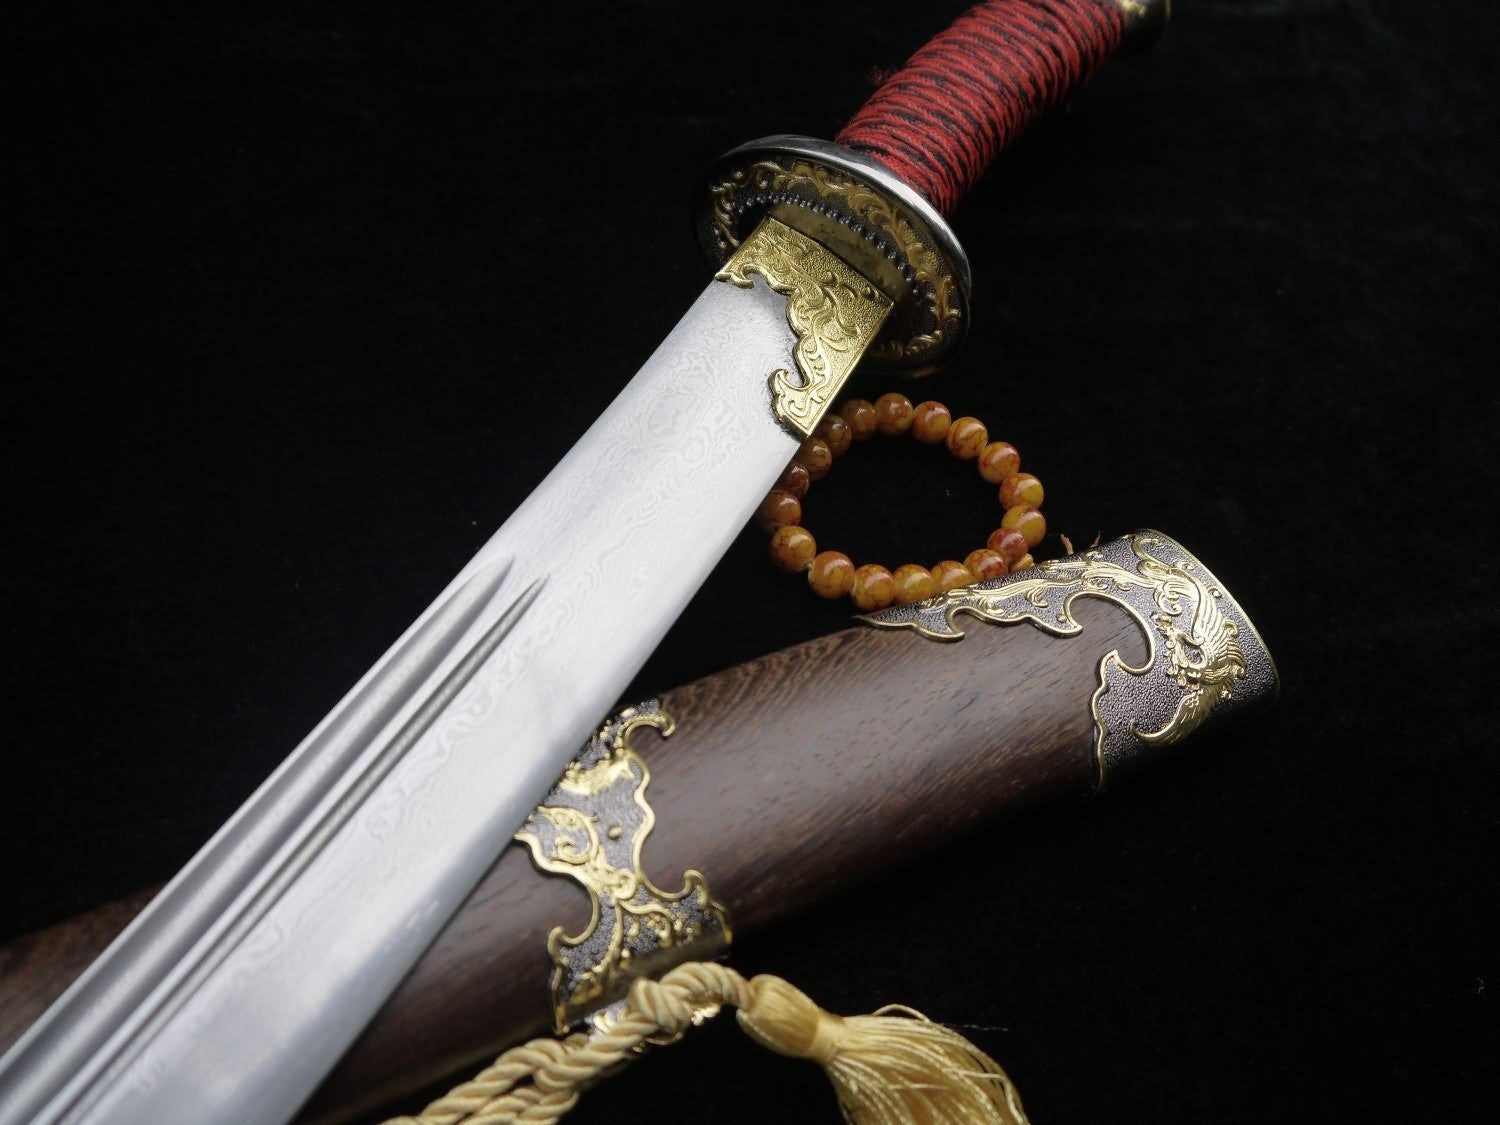 Broadsword/Damascus steel blade/Rosewood scabbard/Alloy fittings/Length 38" - Chinese sword shop